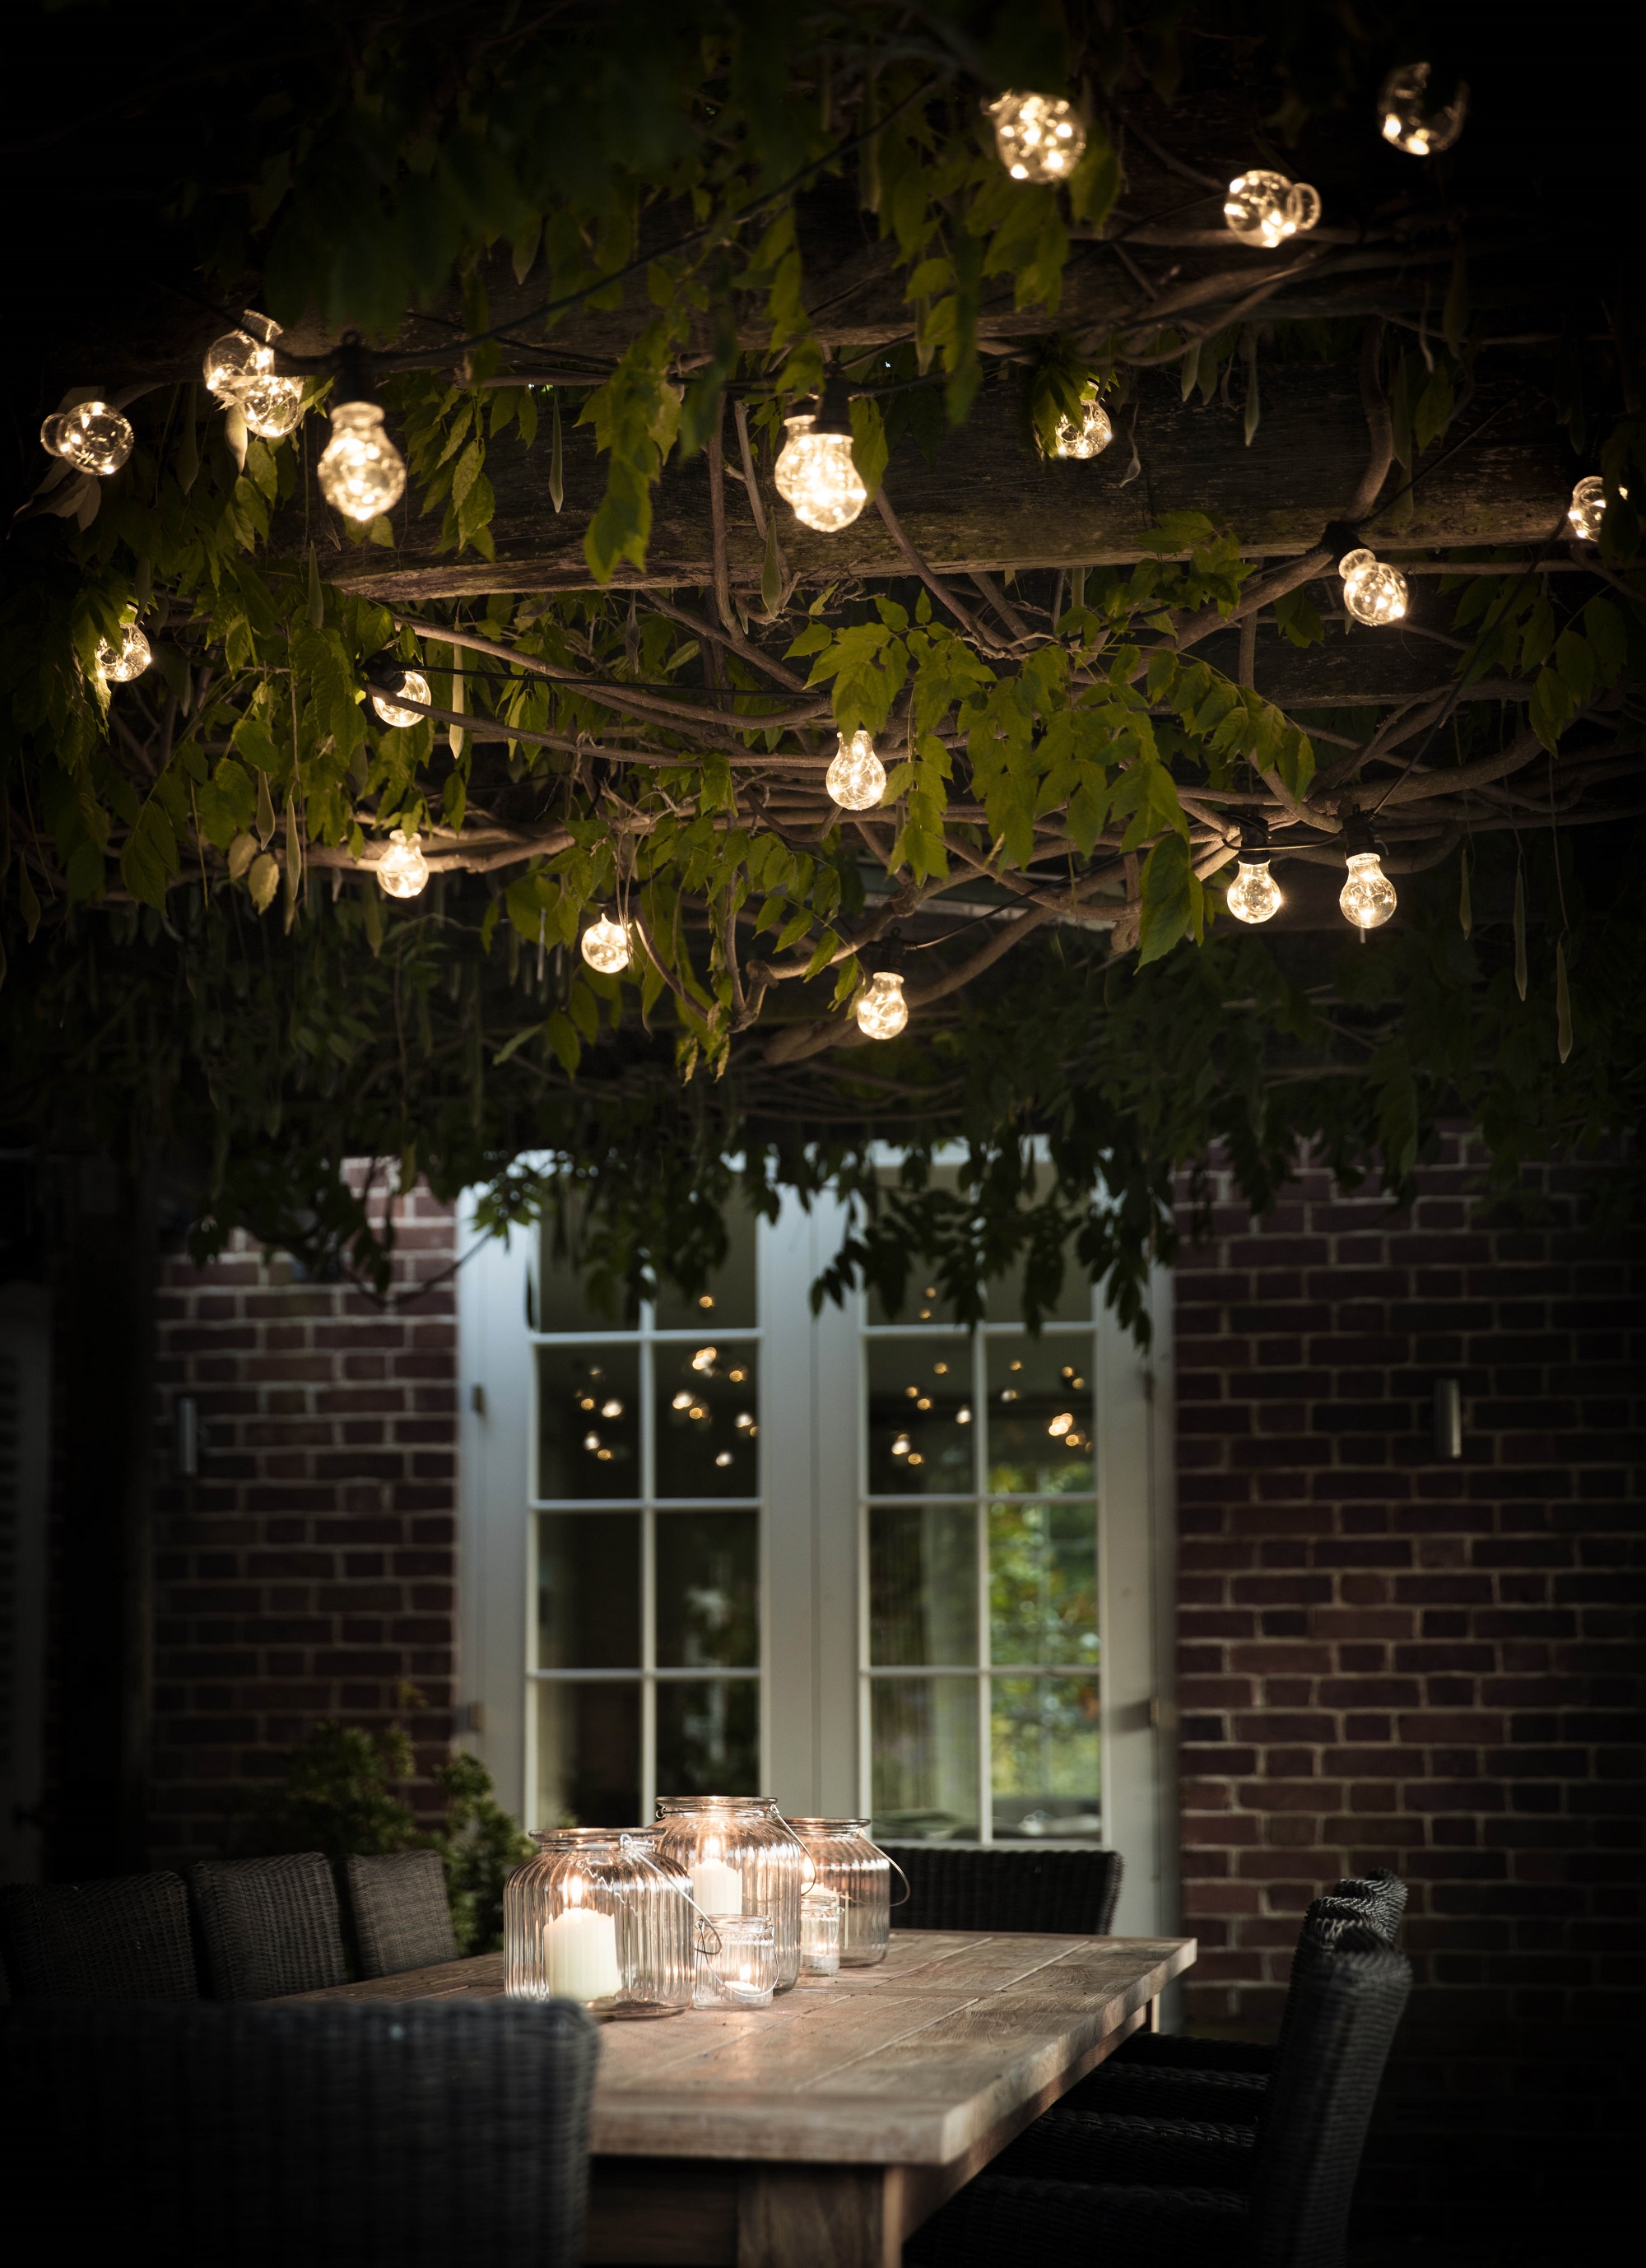 An Outdoor Lighting Decor Ready To Inspire You2